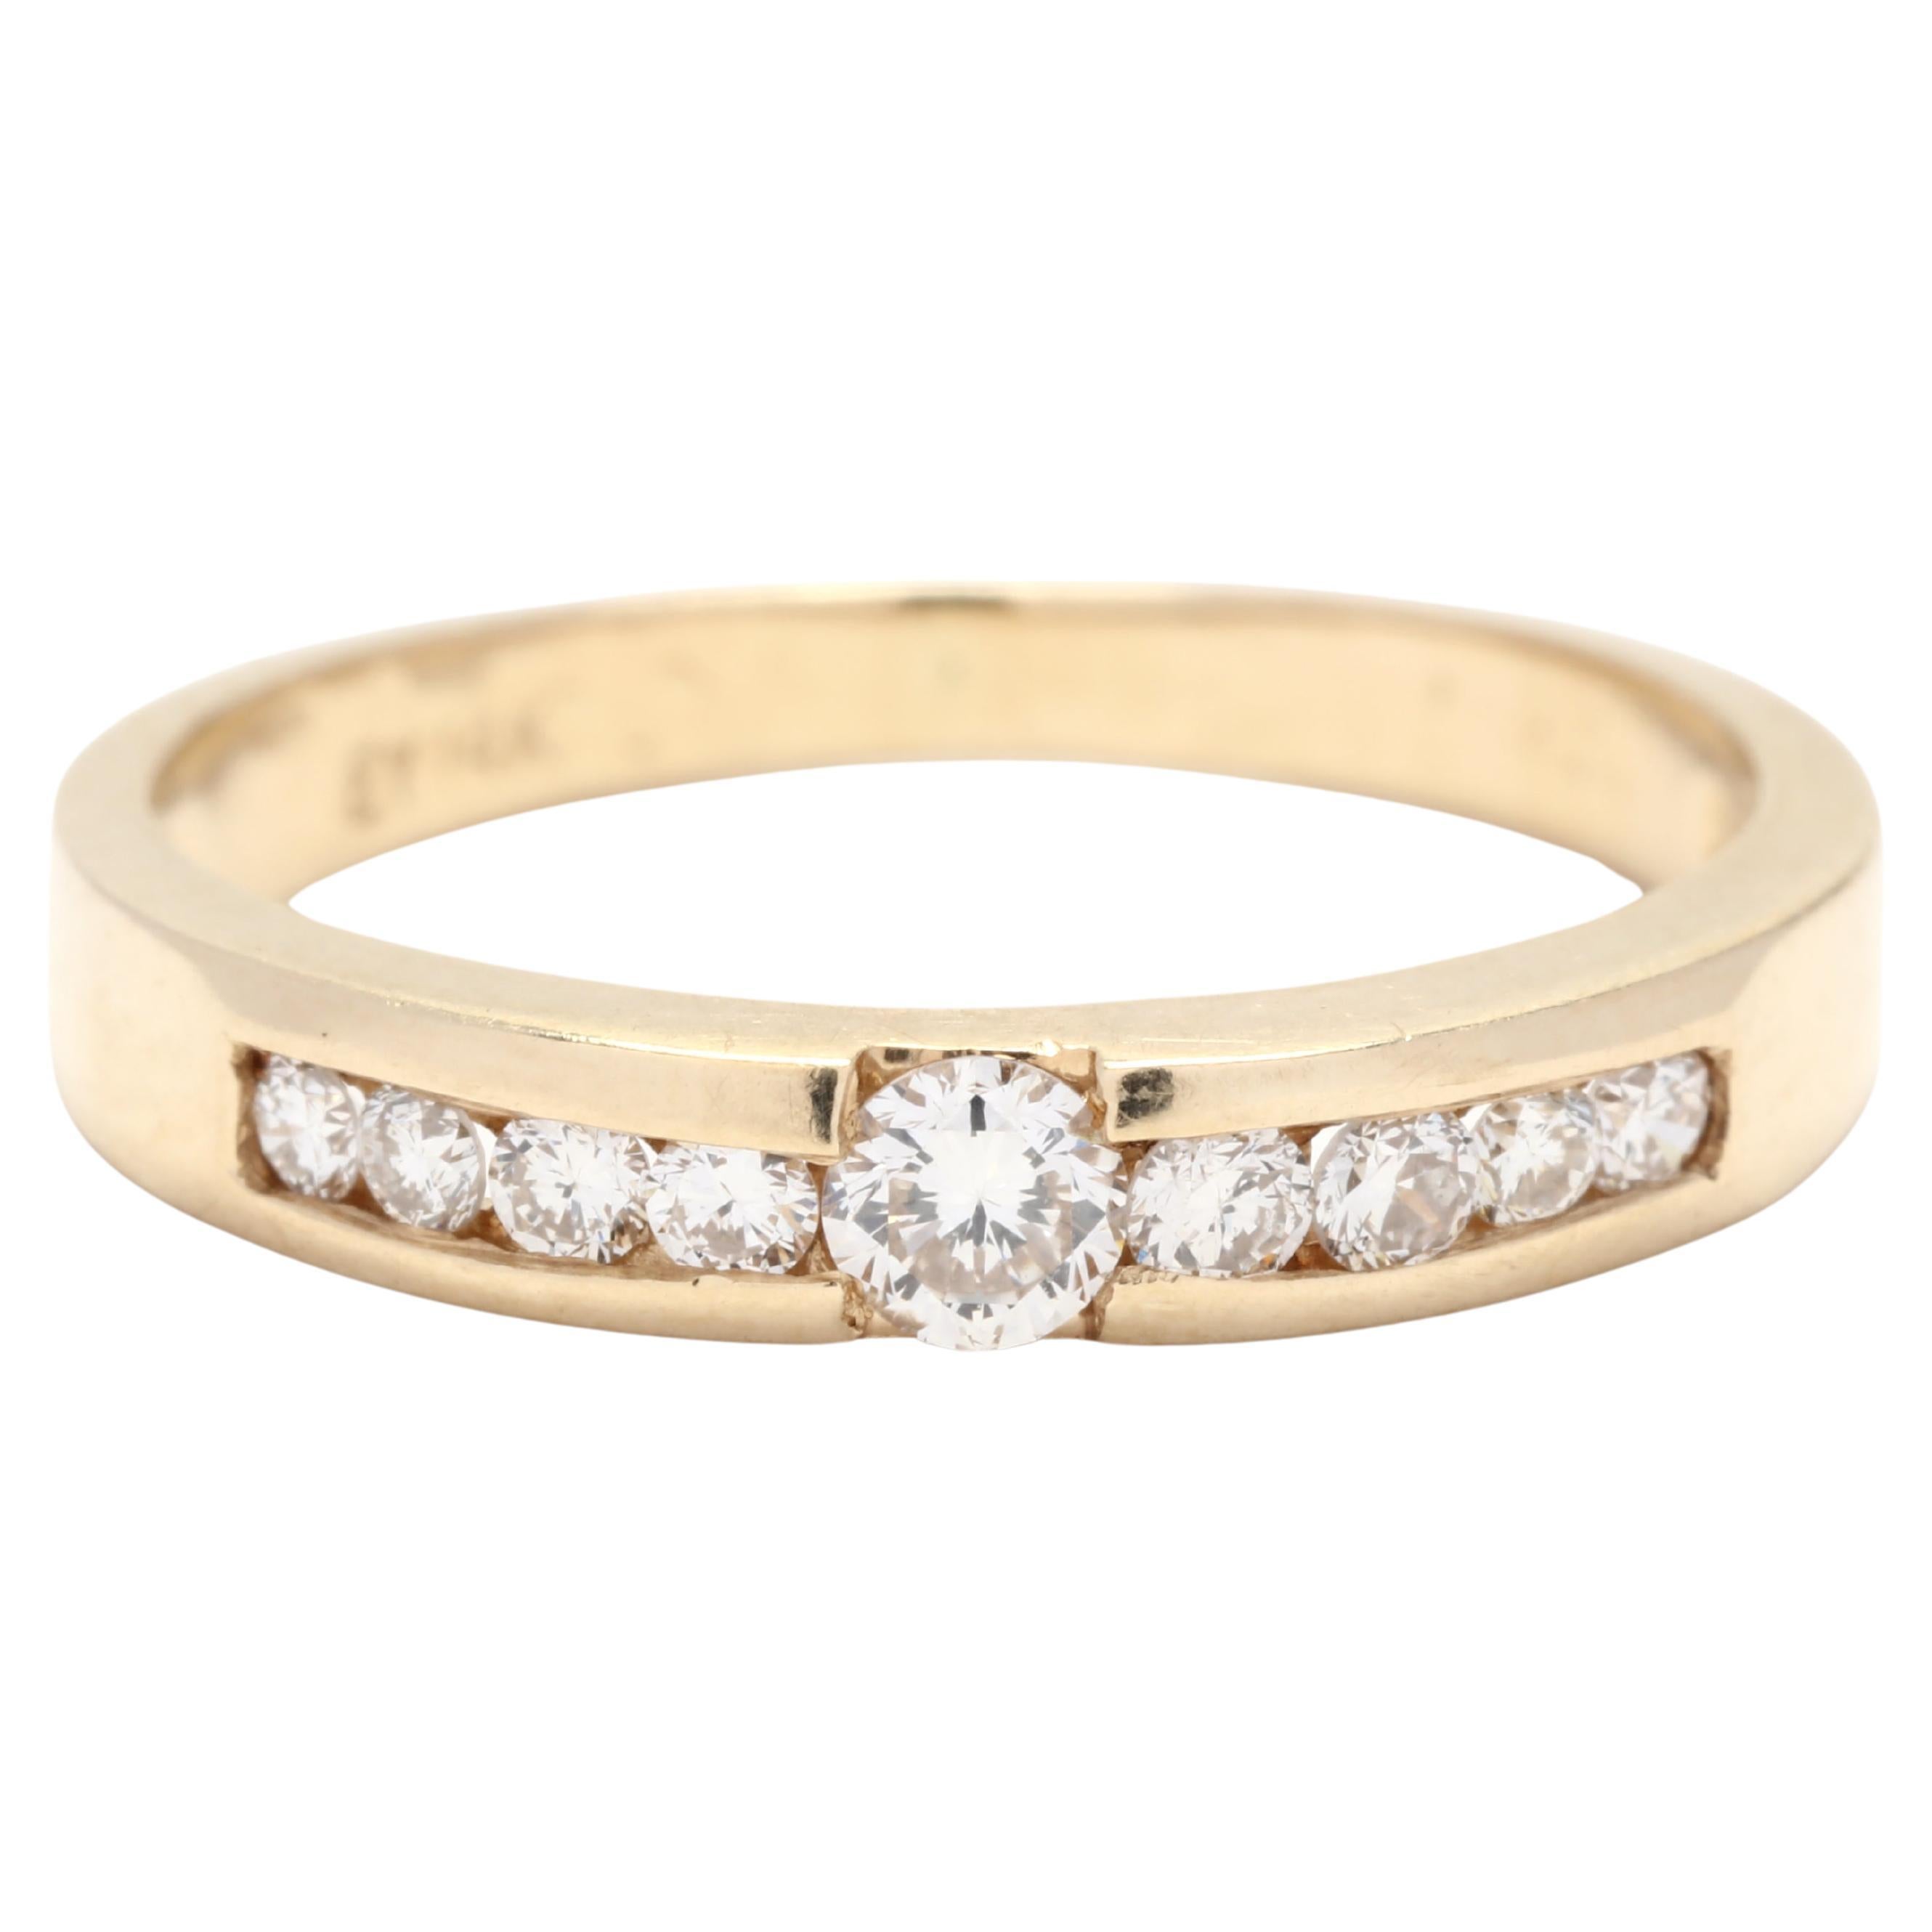 0.25ctw Multi Diamond Band Ring, 14K Yellow Gold, Taille de bague 5.5, empilable